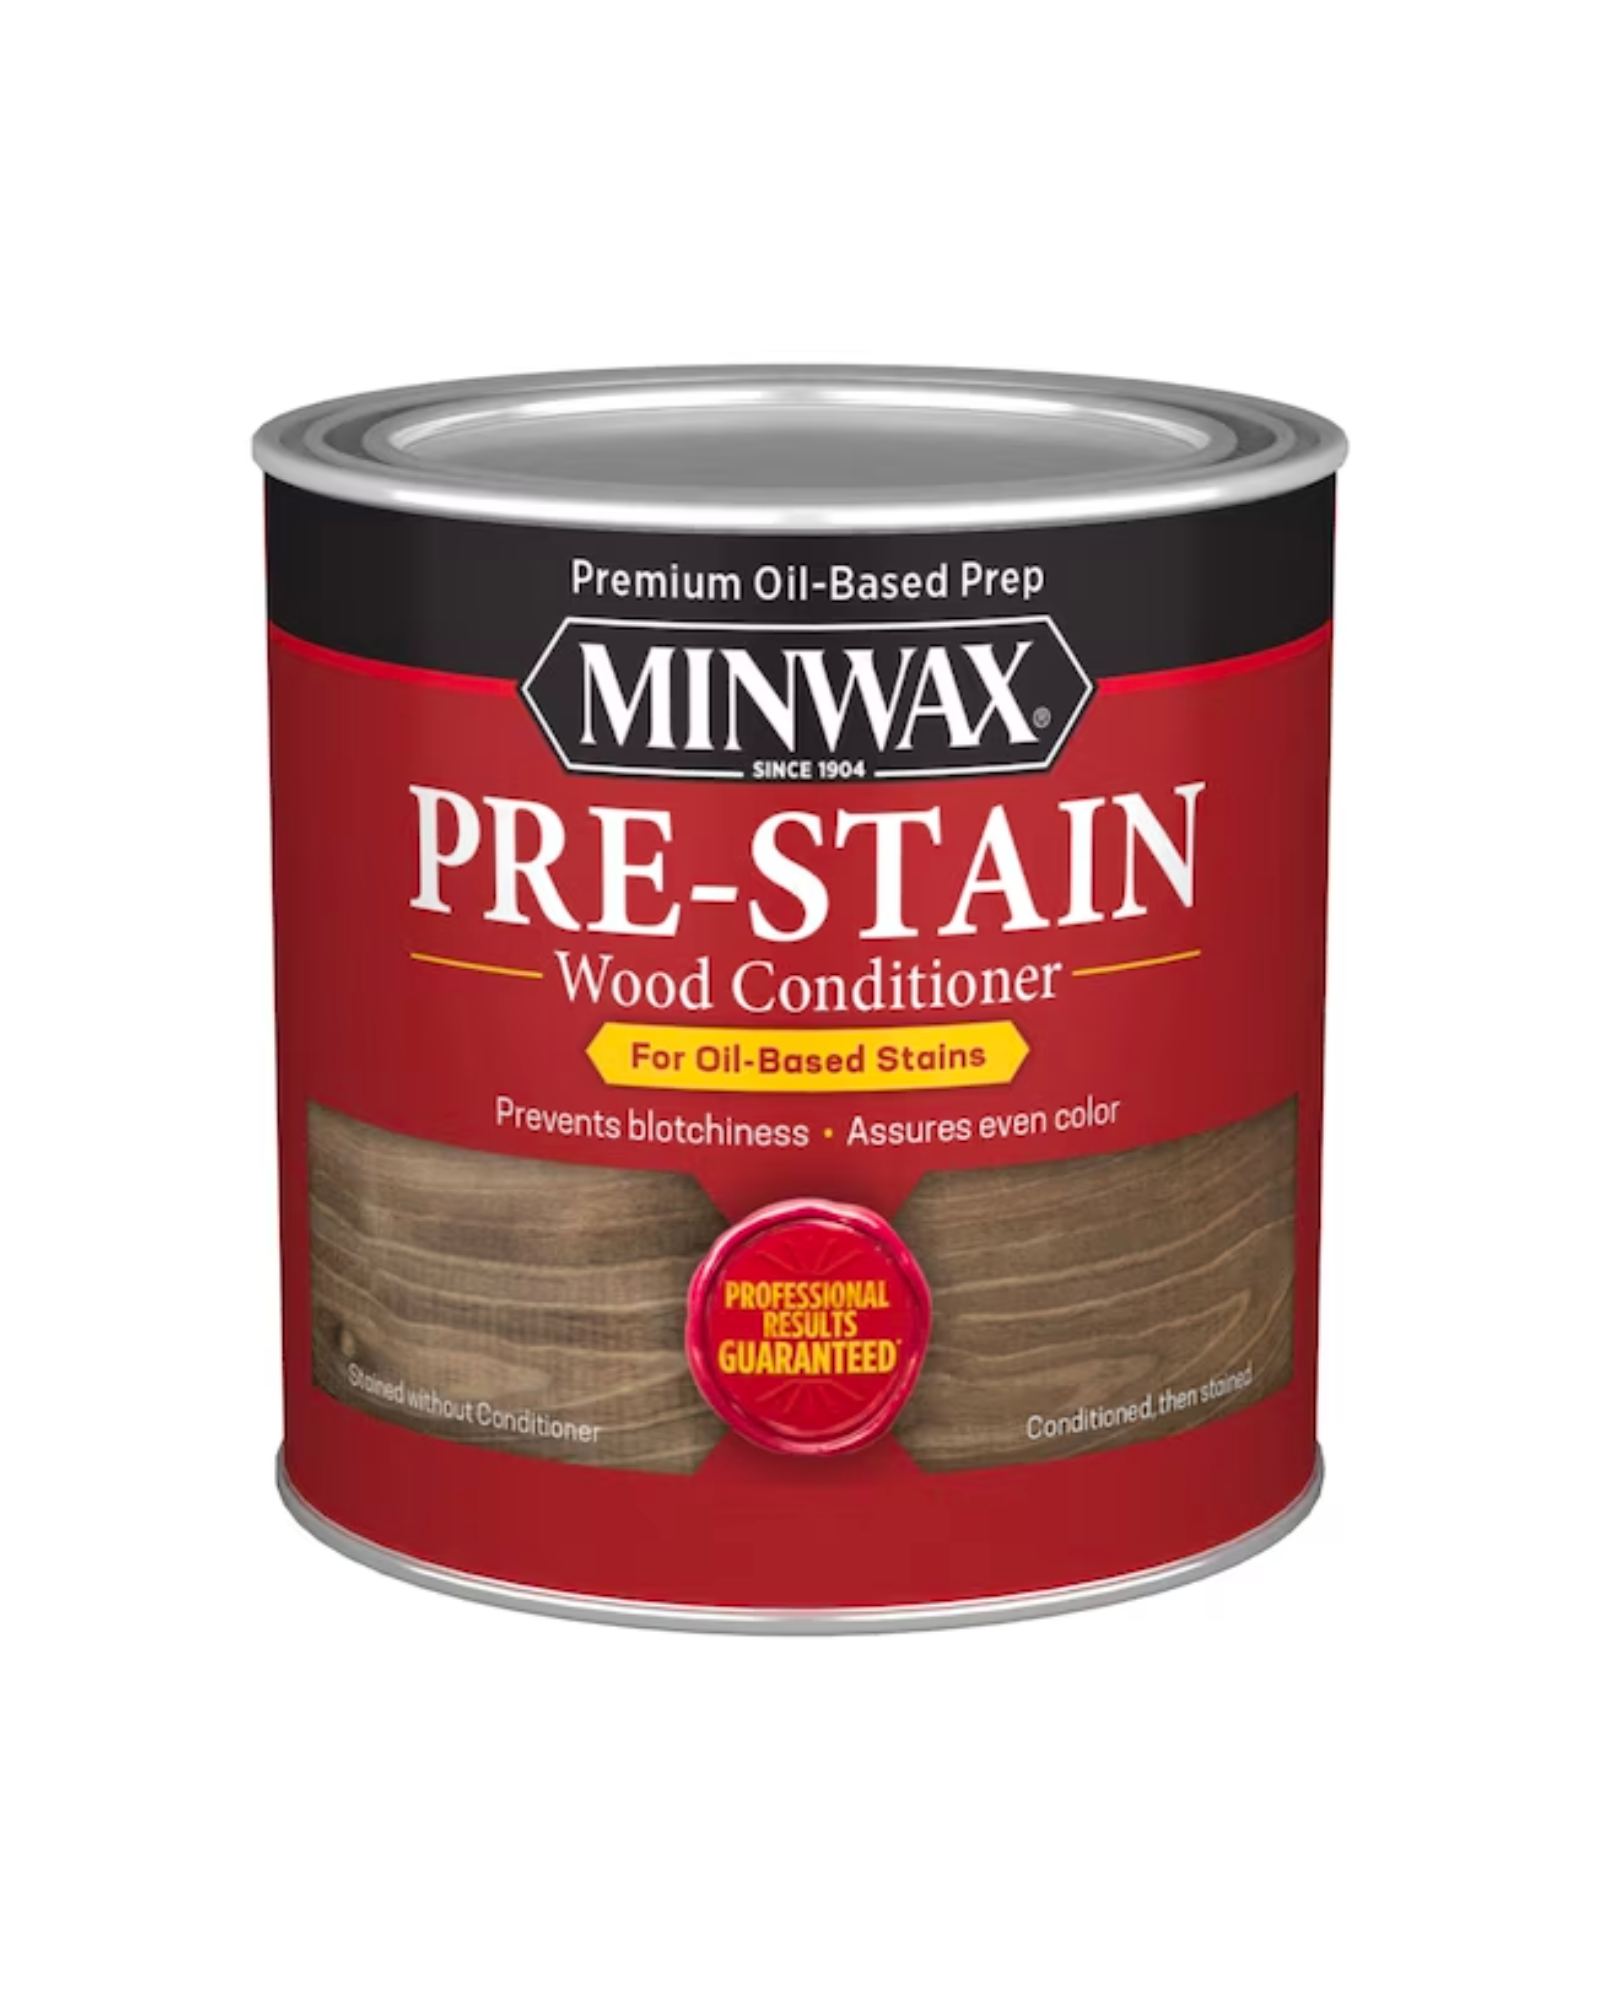 MinWax Pre-Stain Wood Conditioner